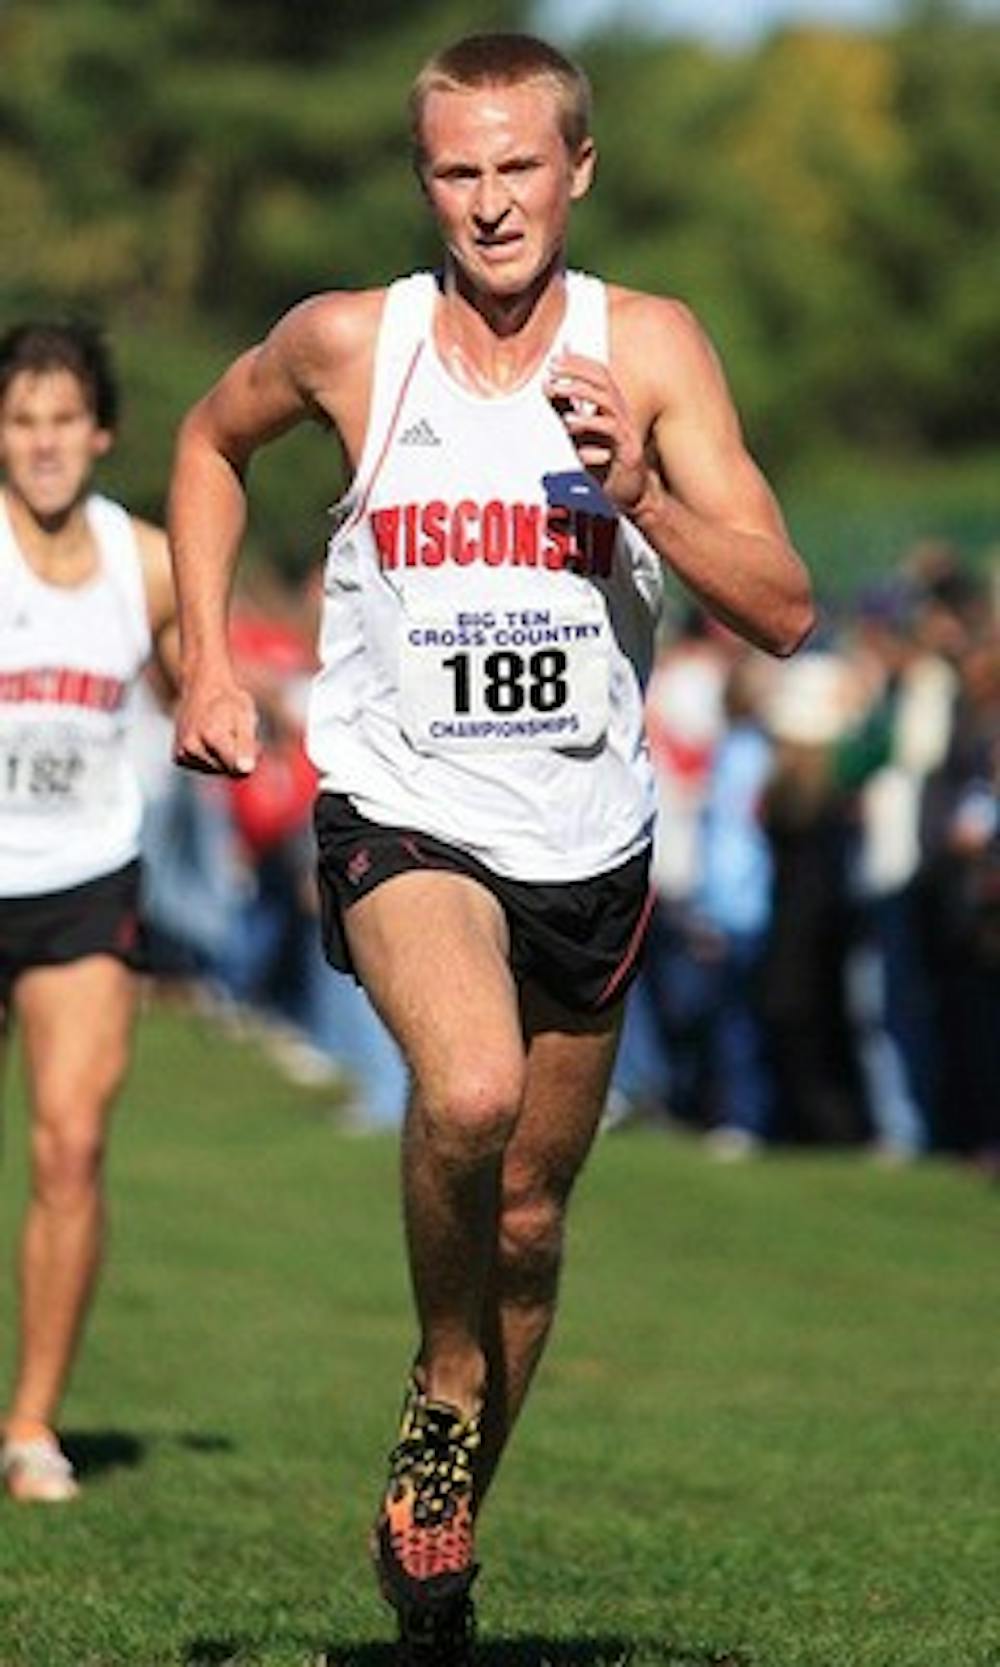 Peacock steps up for Badgers cross country team, earns Big Ten honors